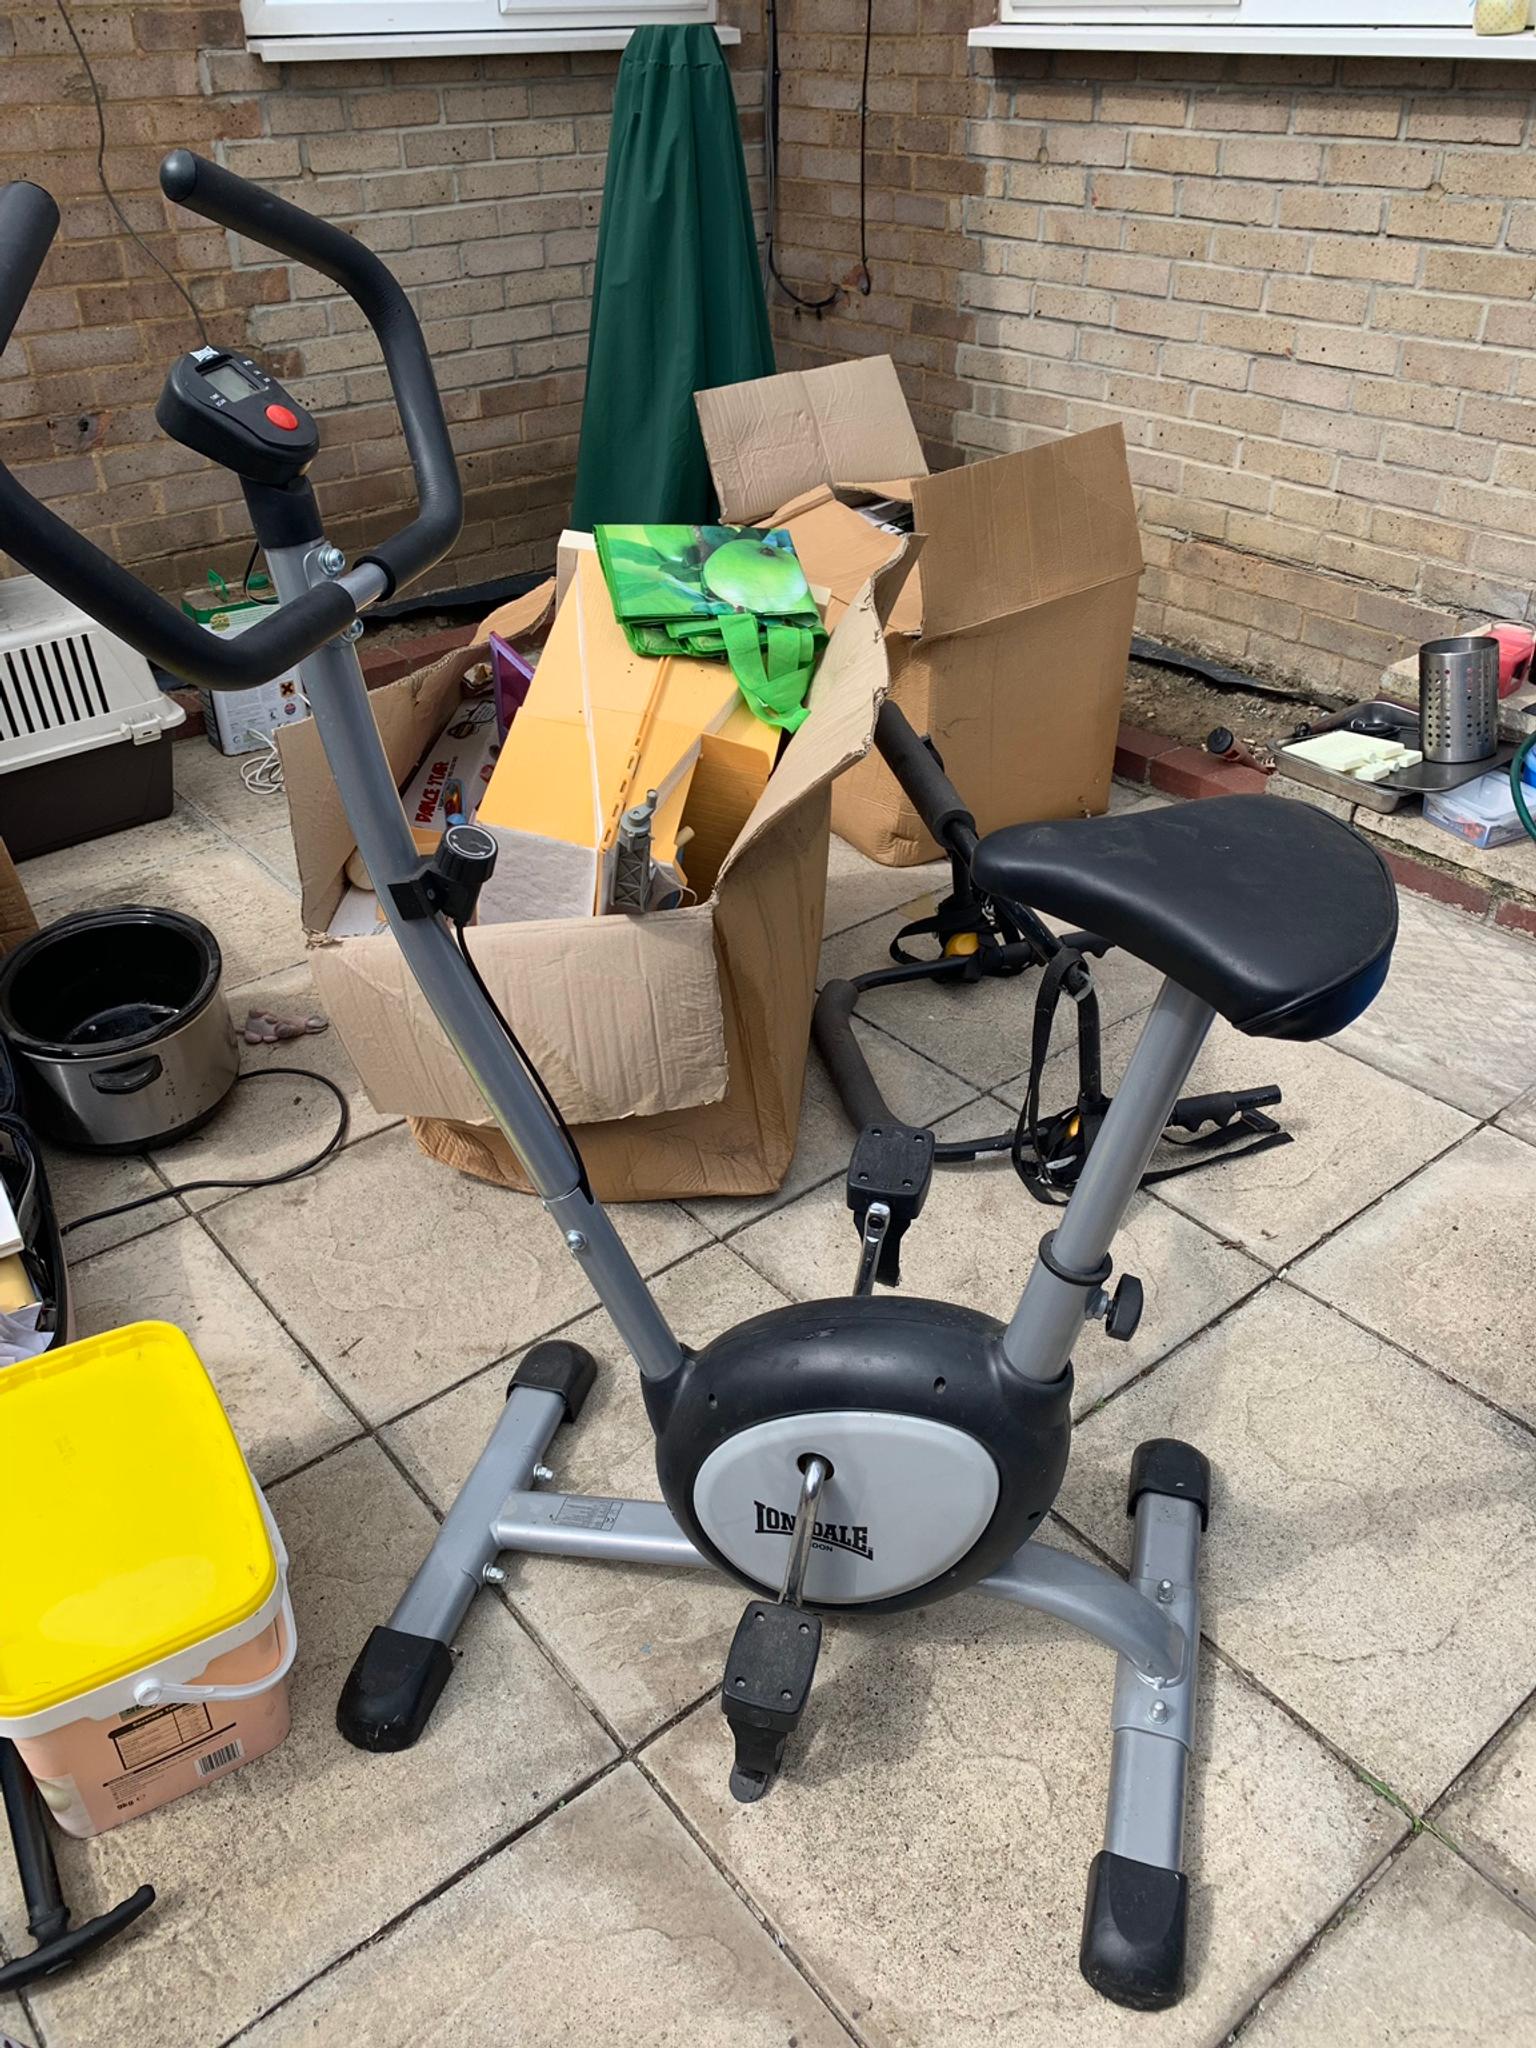 Quick Sale Lonsdale Exercise Bike In London Borough Of Barking And